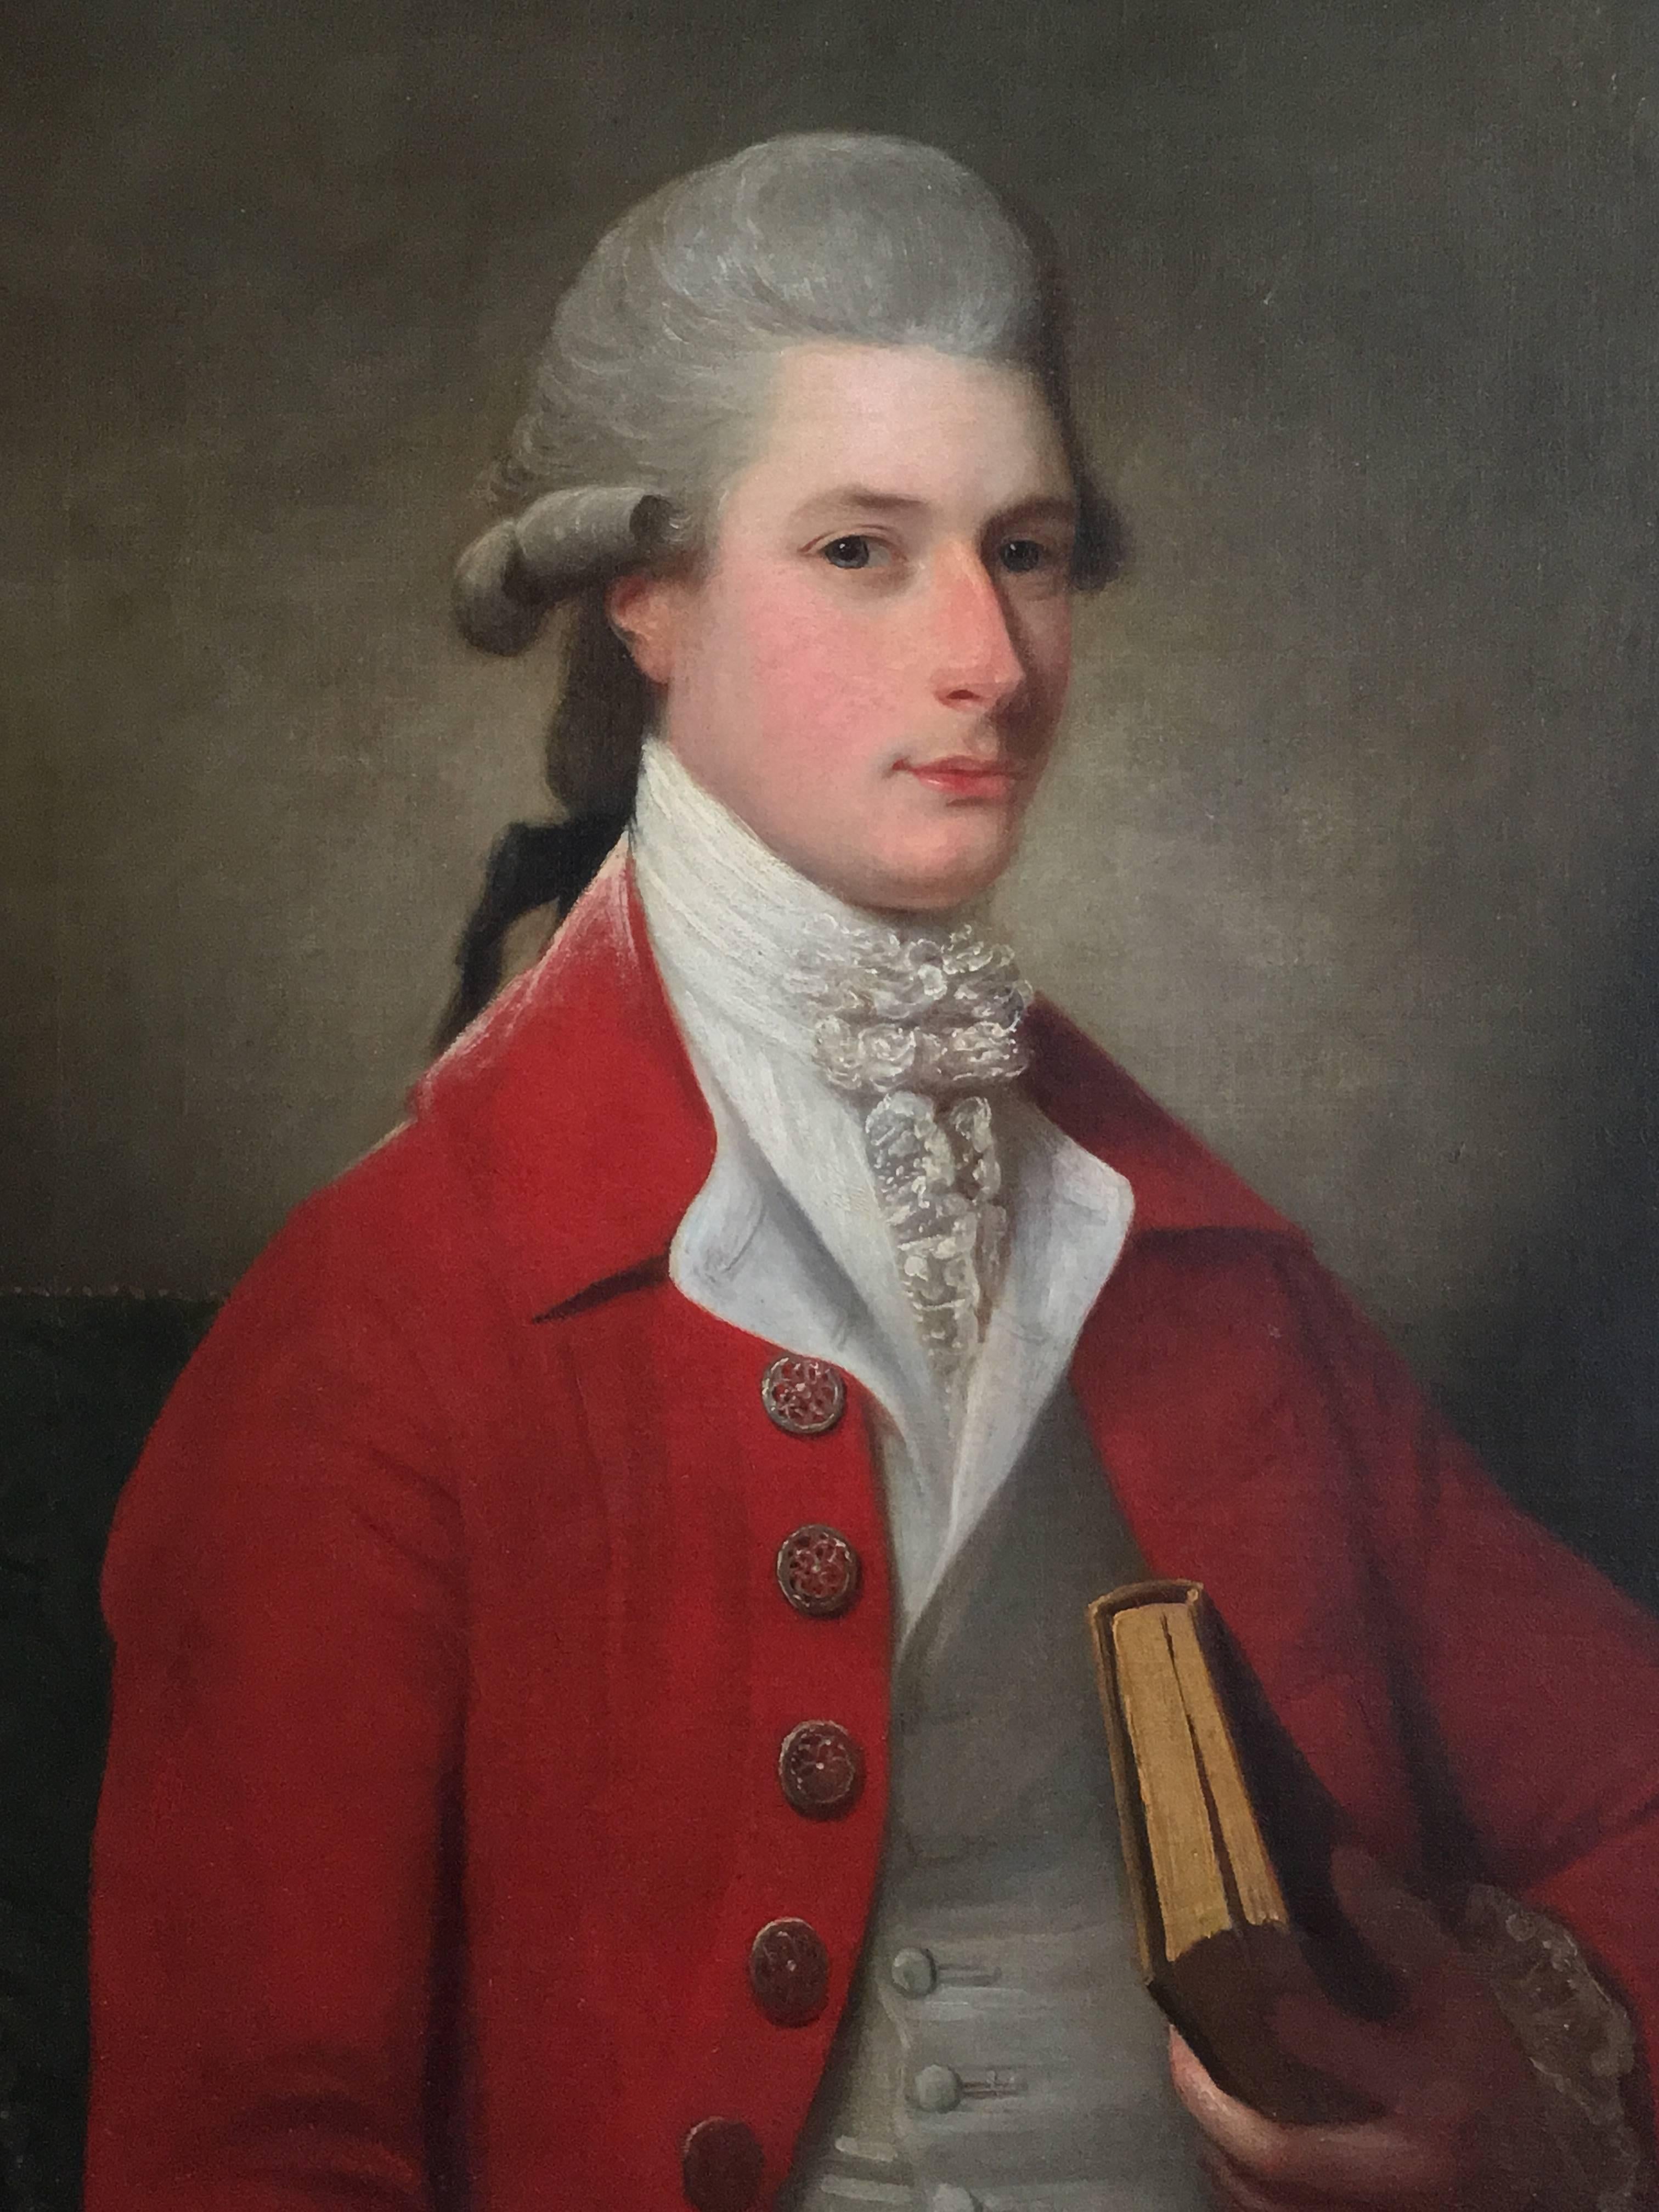 David Martin Portrait Painting - Portrait of Sir Archibald Seton Half-Length Wearing a Red Coat, Holding a Book.